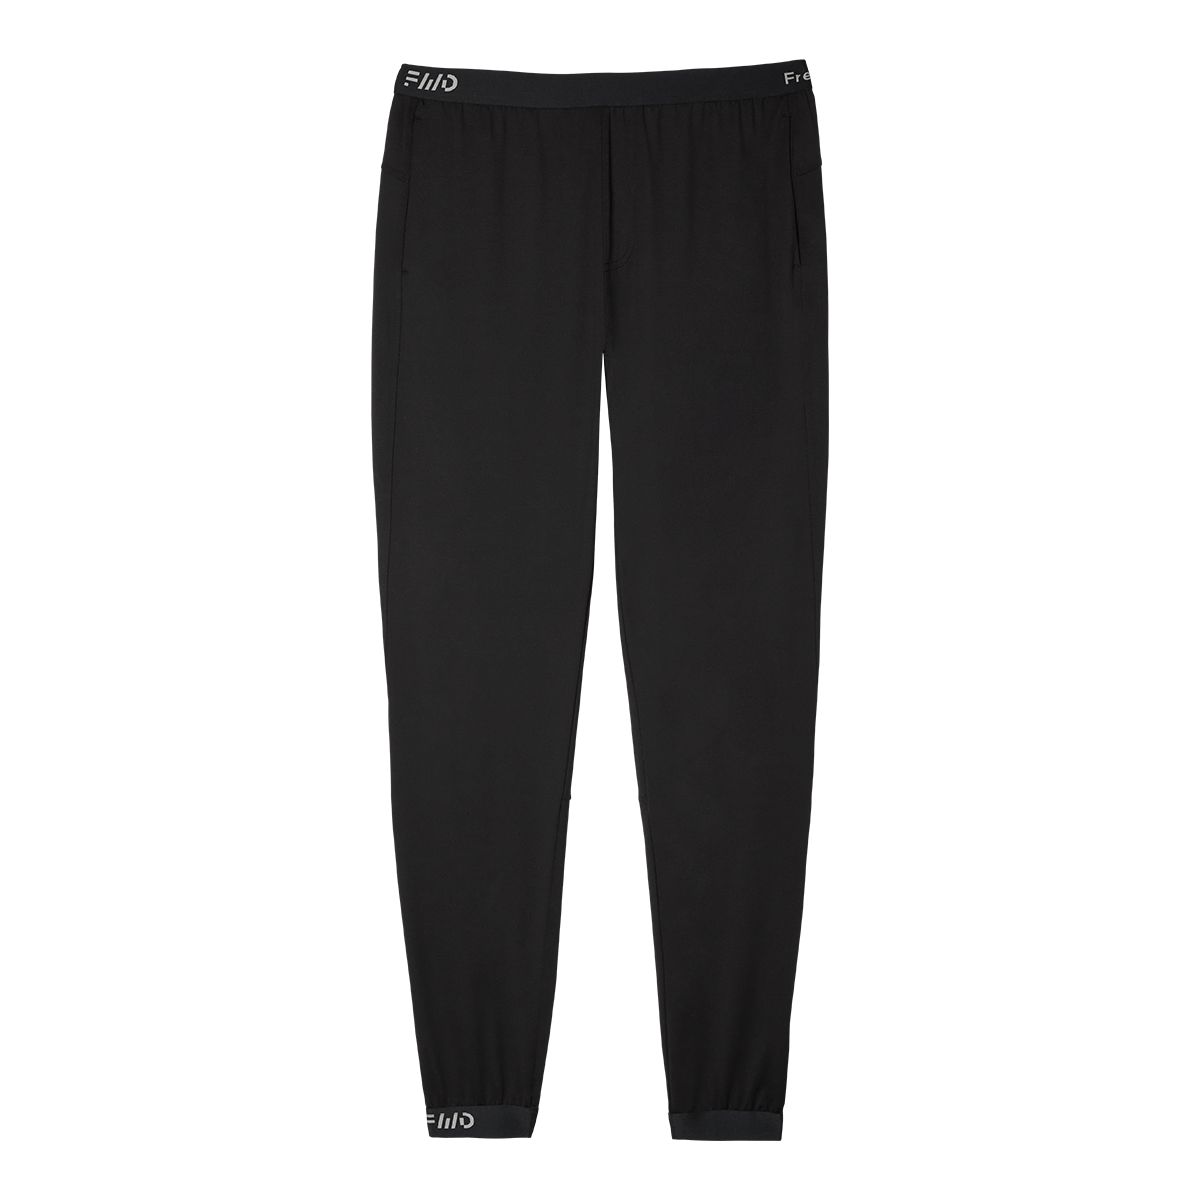 FWD Men's Free All Day Lounge Jogger Pants